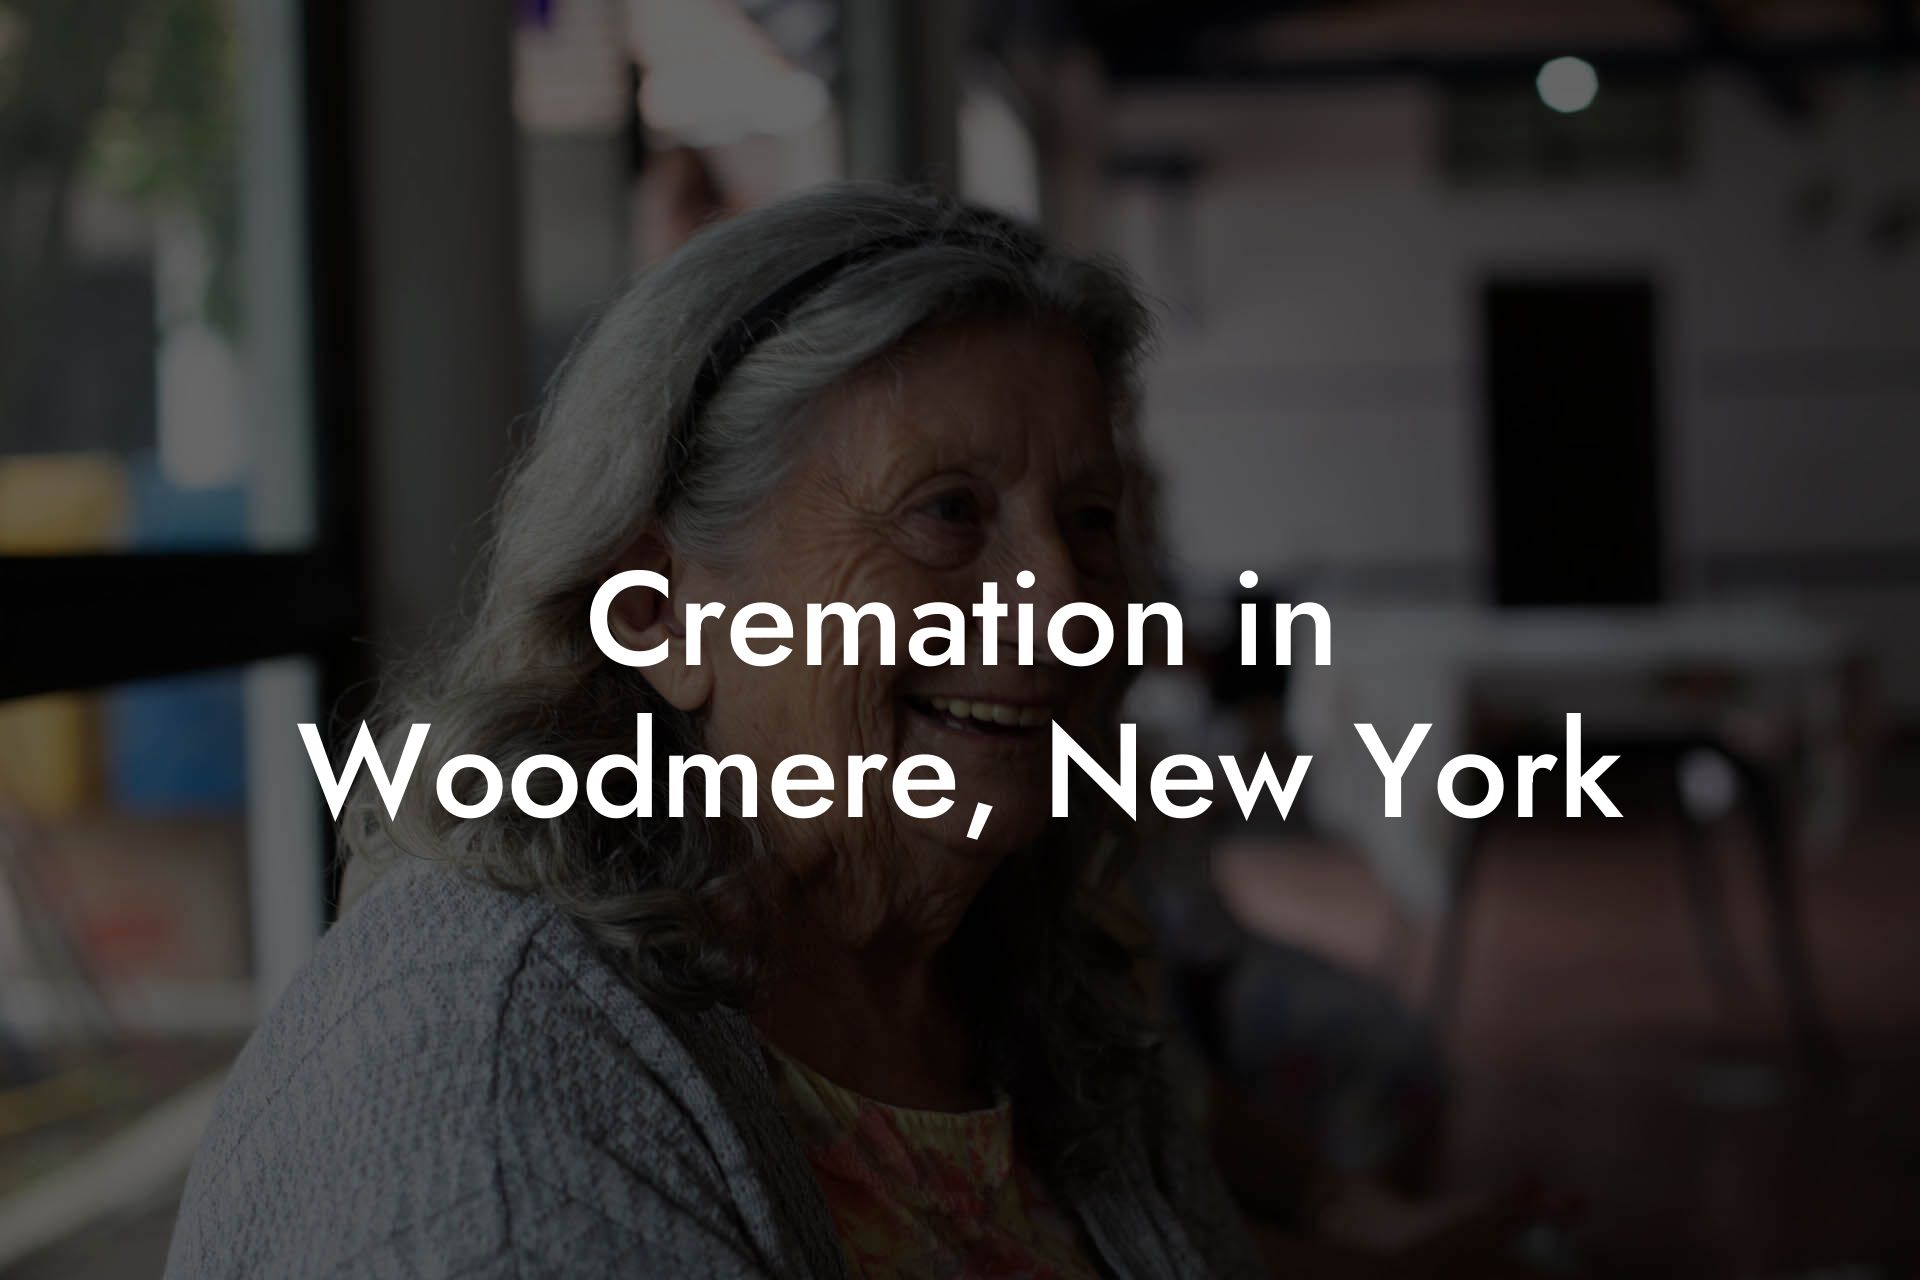 Cremation in Woodmere, New York